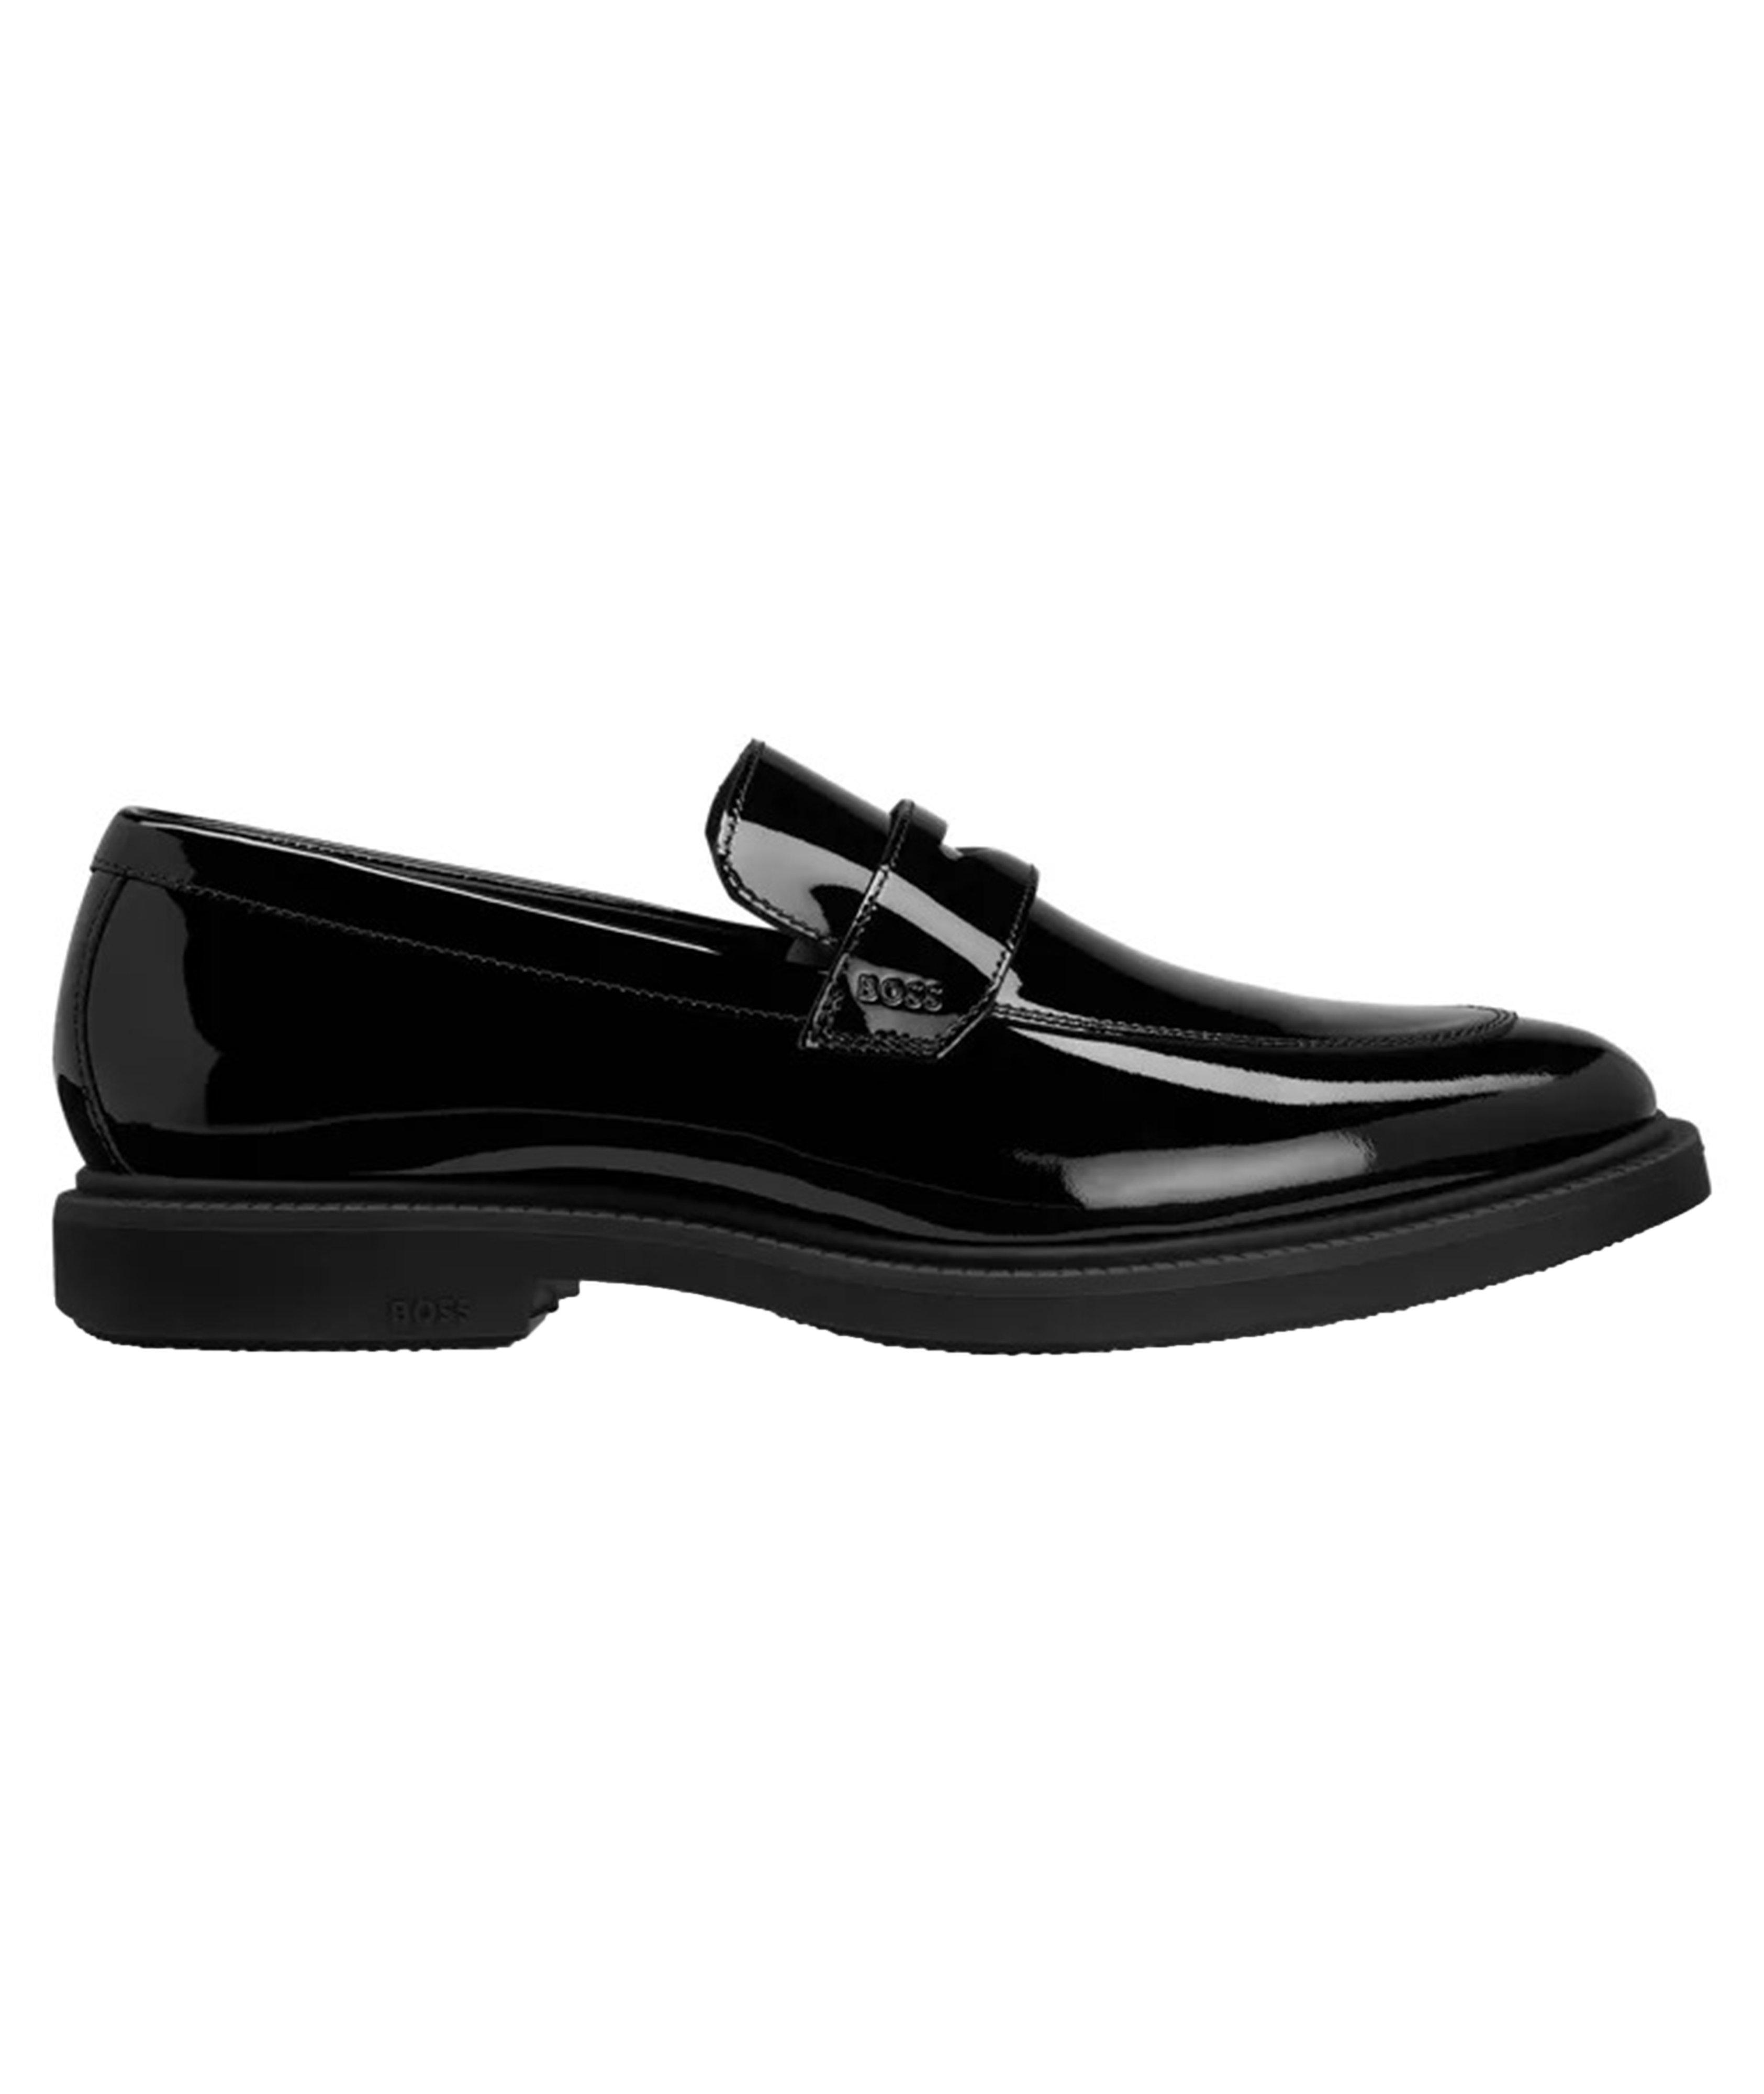 Patent Loafers with Logo Detail  image 0